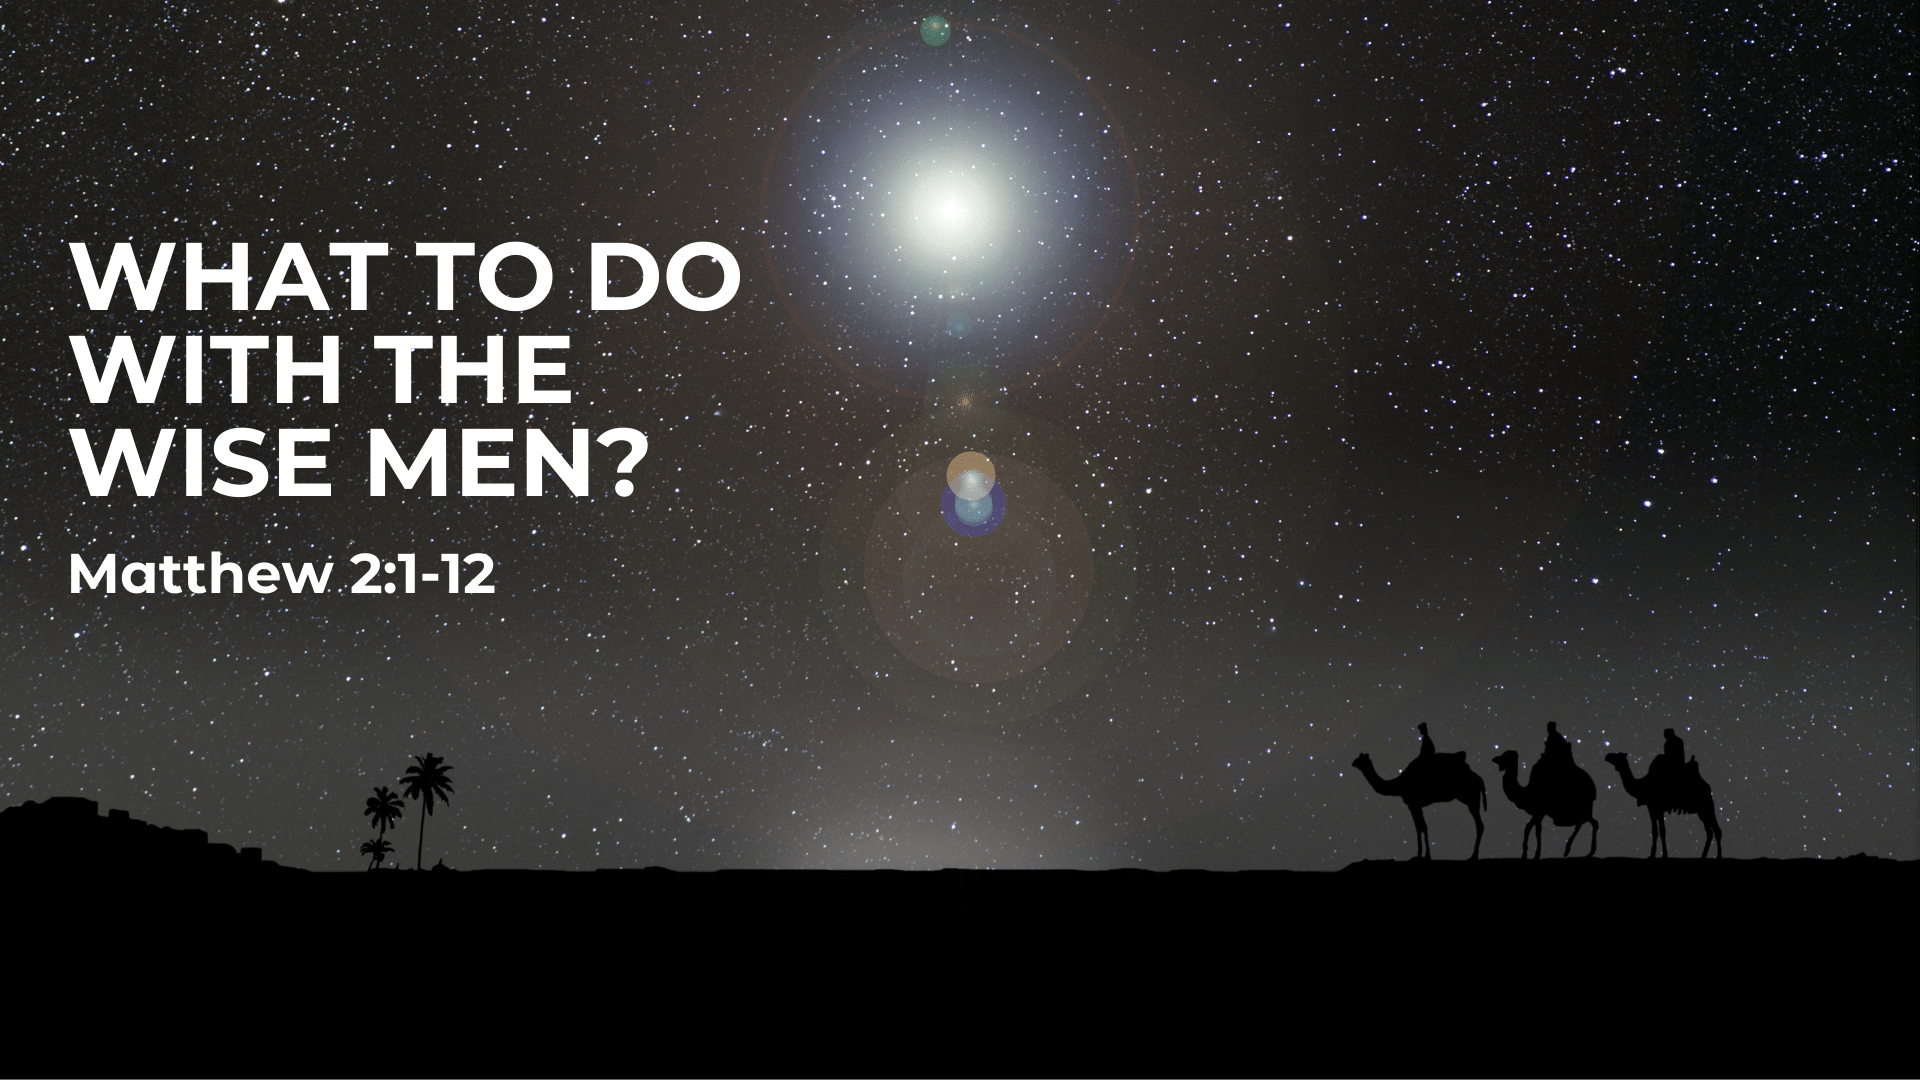 What To Do With The Wise Men?